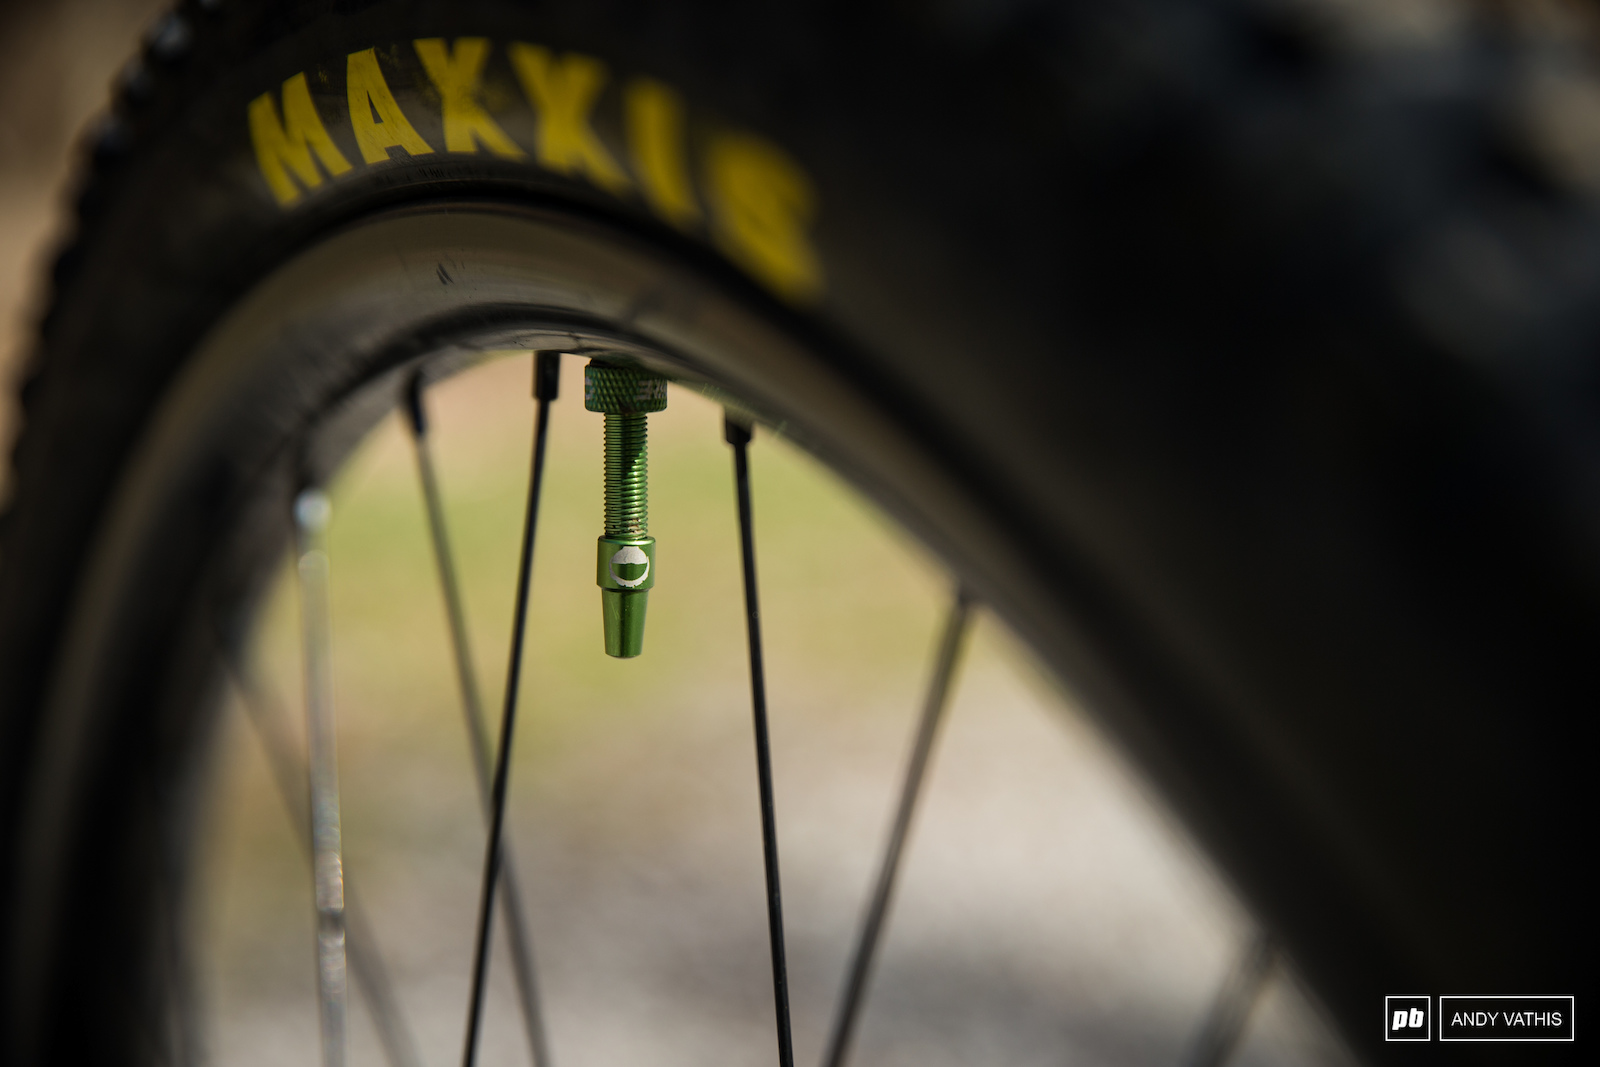 Kona's wheels are outfitted with Kush Core helping out when the going gets rough.